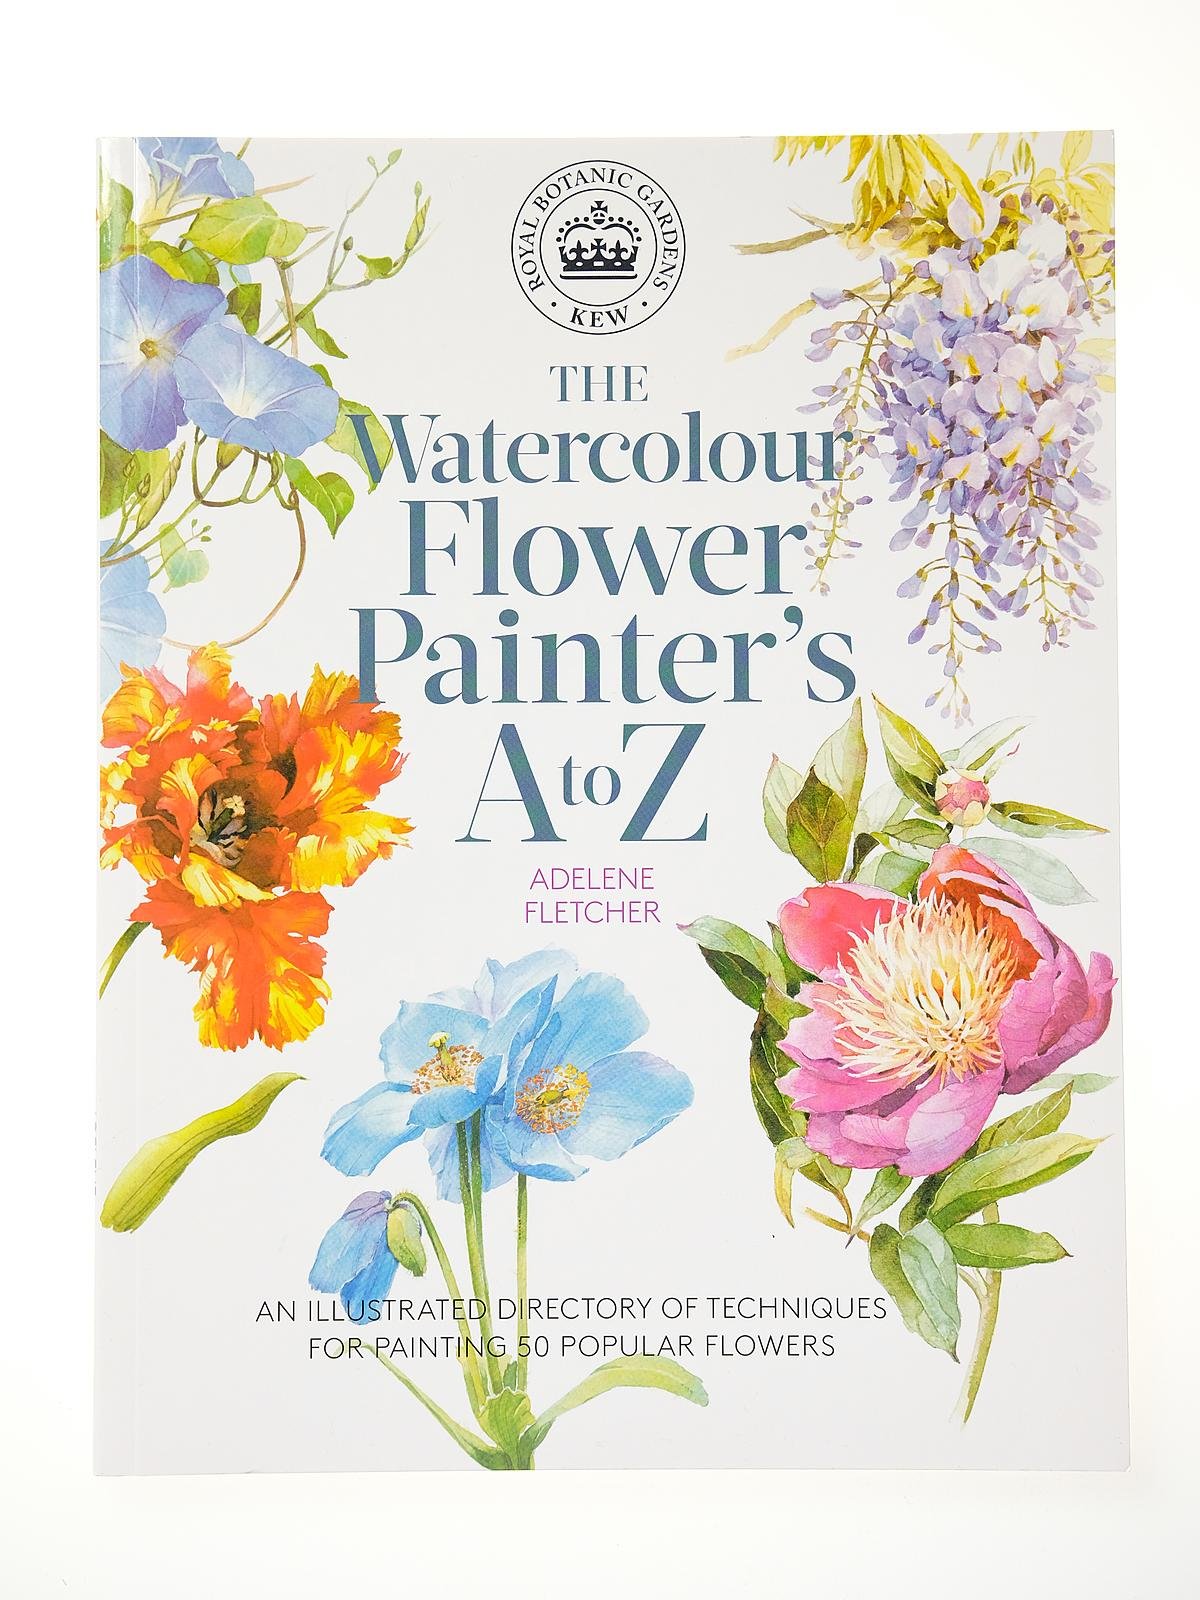 Search Press - The Watercolour Flower Painter's A to Z